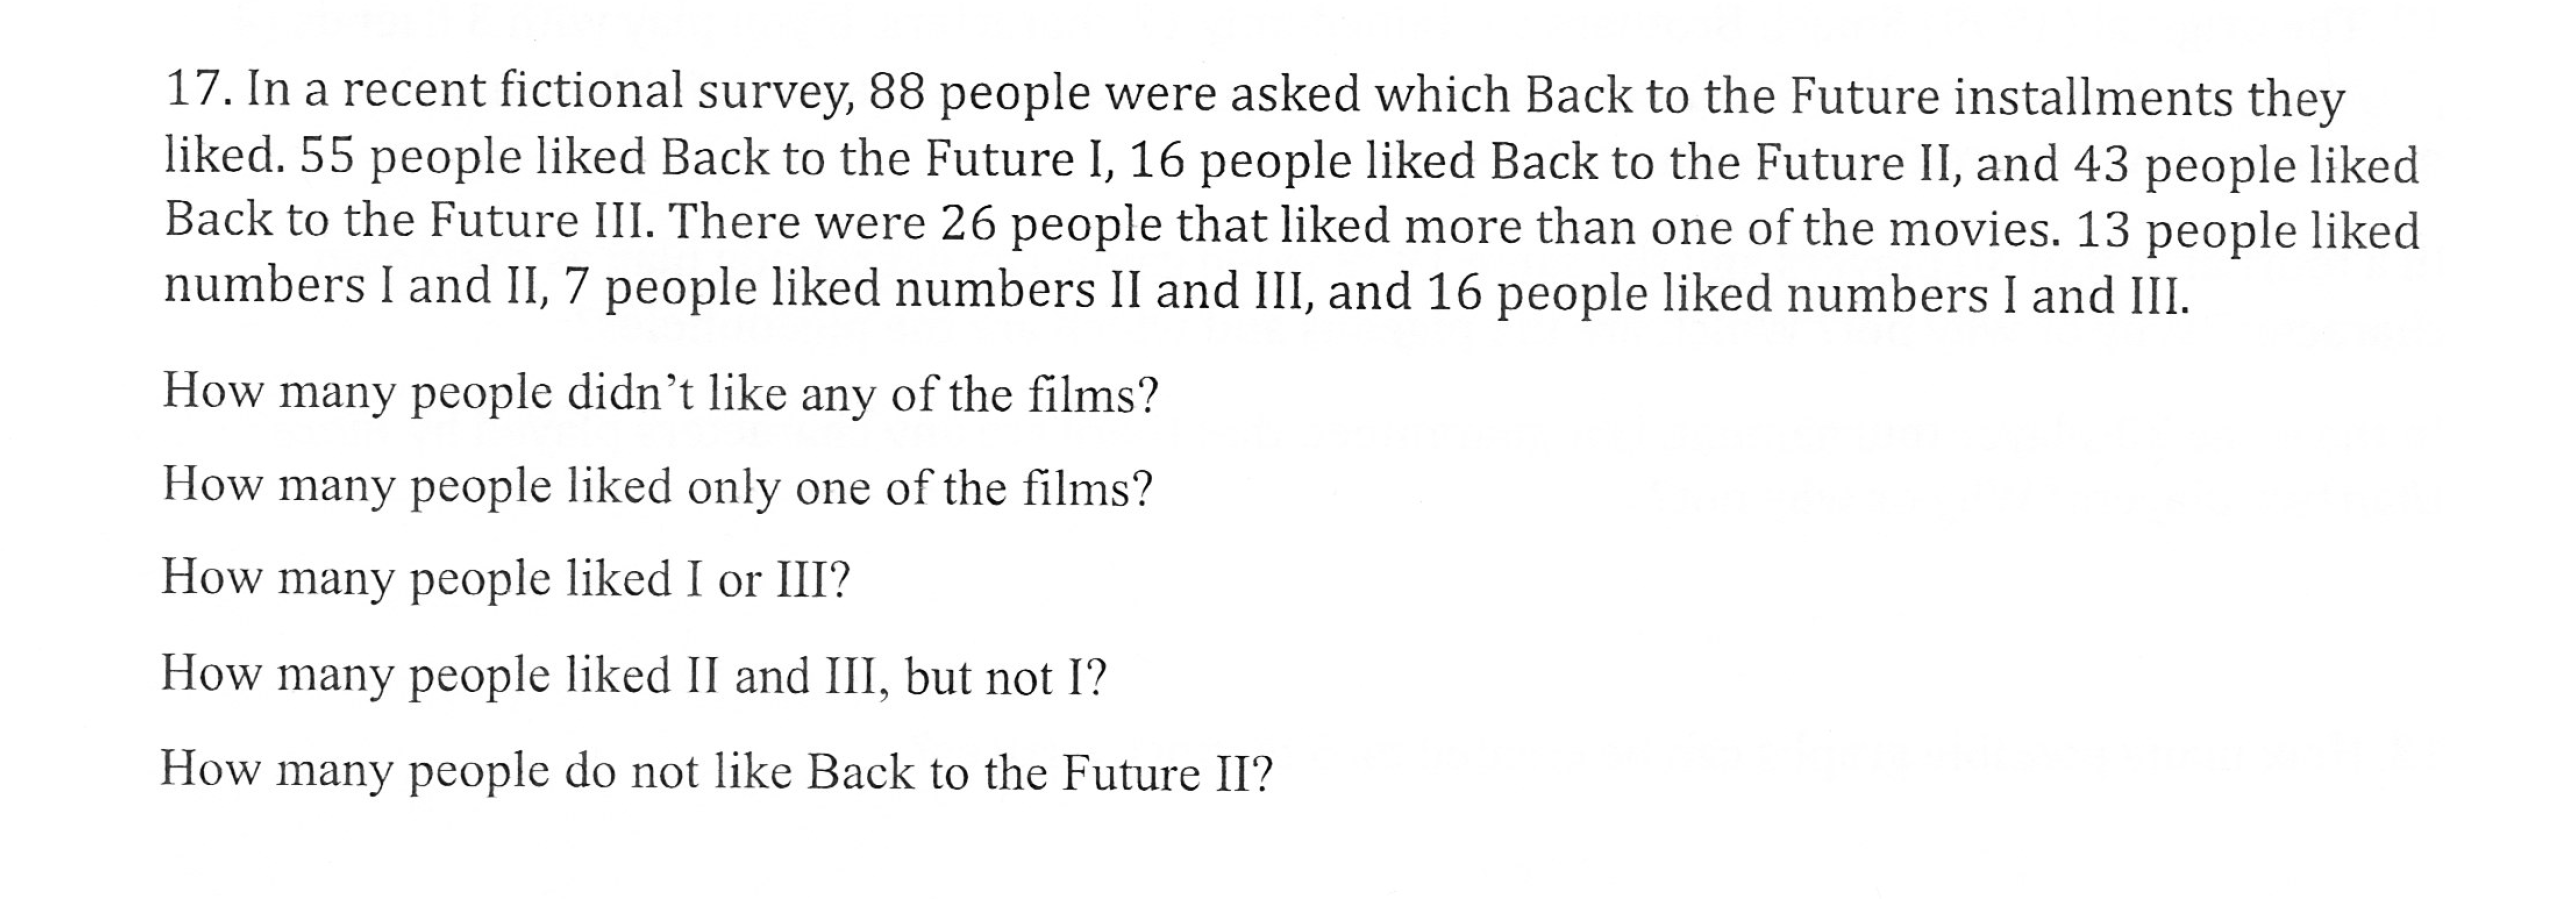 17. In a recent fictional survey, 88 people were asked which Back to the Future installments they
liked. 55 people liked Back to the Future I, 16 people liked Back to the Future II, and 43 people liked
Back to the Future III. There were 26 people that liked more than one of the movies. 13 people liked
numbers l and II, 7 people liked numbers 11 and ill, and 16 people liked numbers l and Ш
How many people didn't like any of the films?
How many people liked only one of the films?
How many people liked I or III?
How many people liked II and III, but not I?
How many people do not like Back to the Future II?
